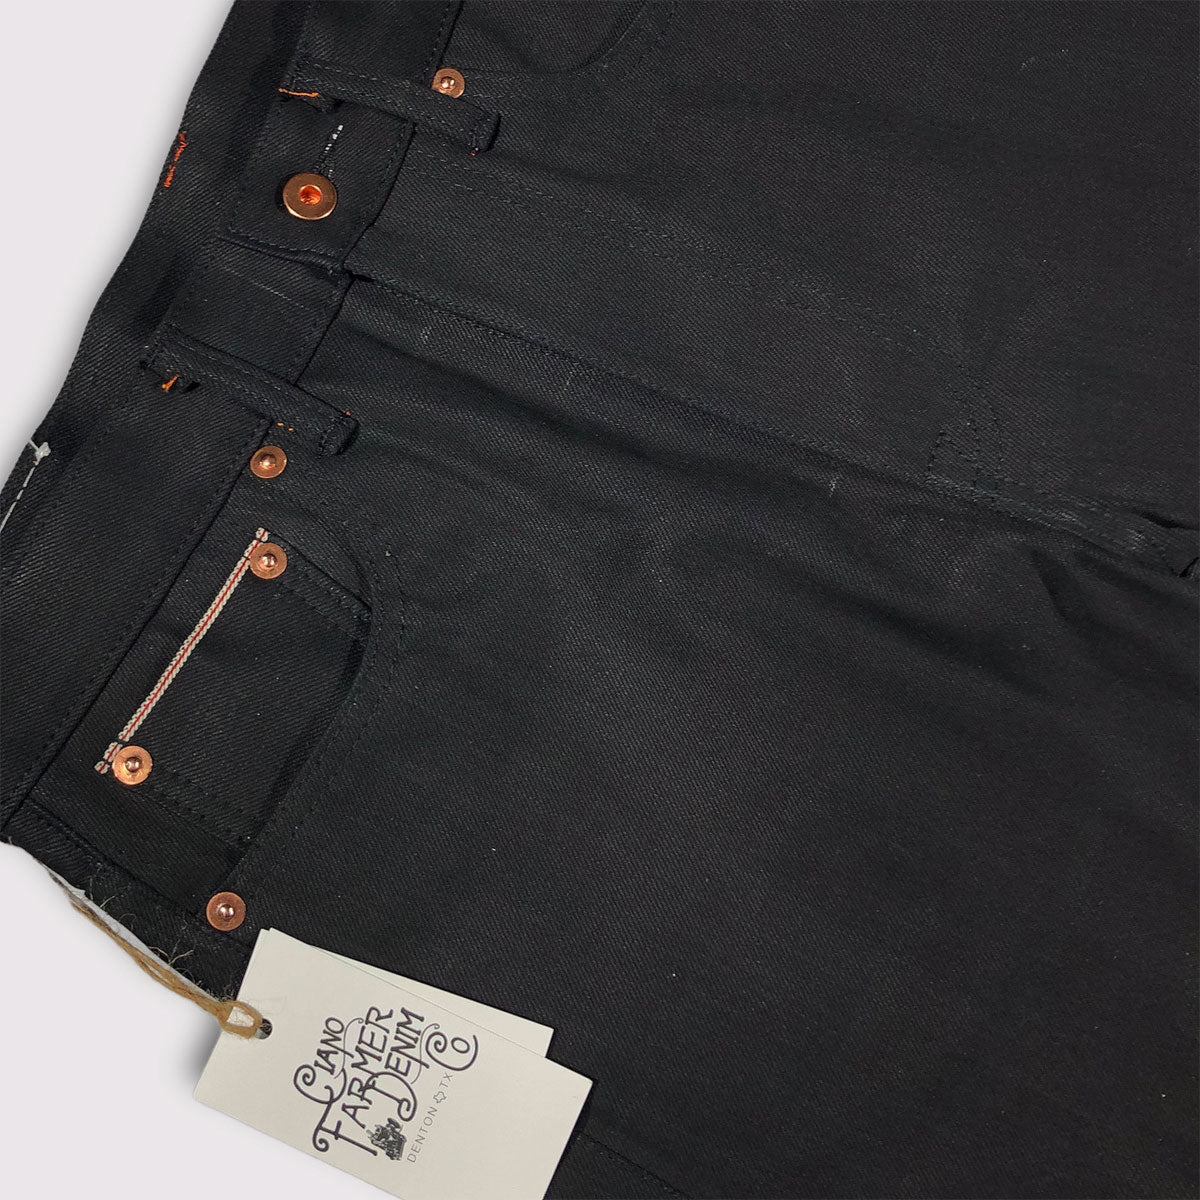 14oz Italian Double Black Red/White Selvage 5 POCKET 29W 27.5L 997 Miner Fit